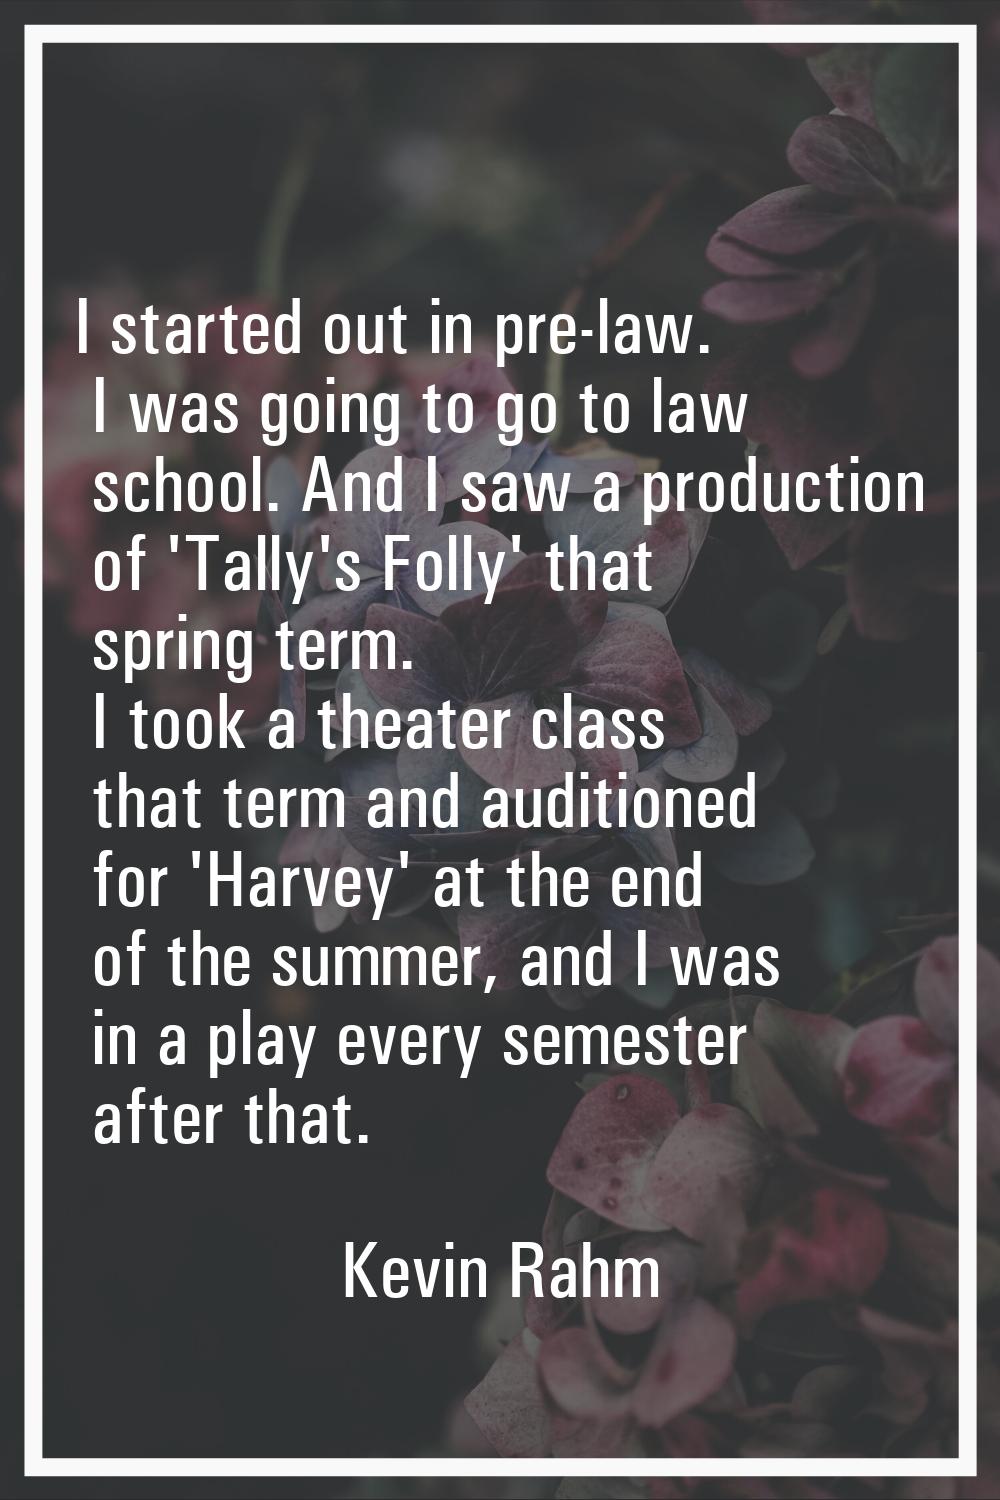 I started out in pre-law. I was going to go to law school. And I saw a production of 'Tally's Folly